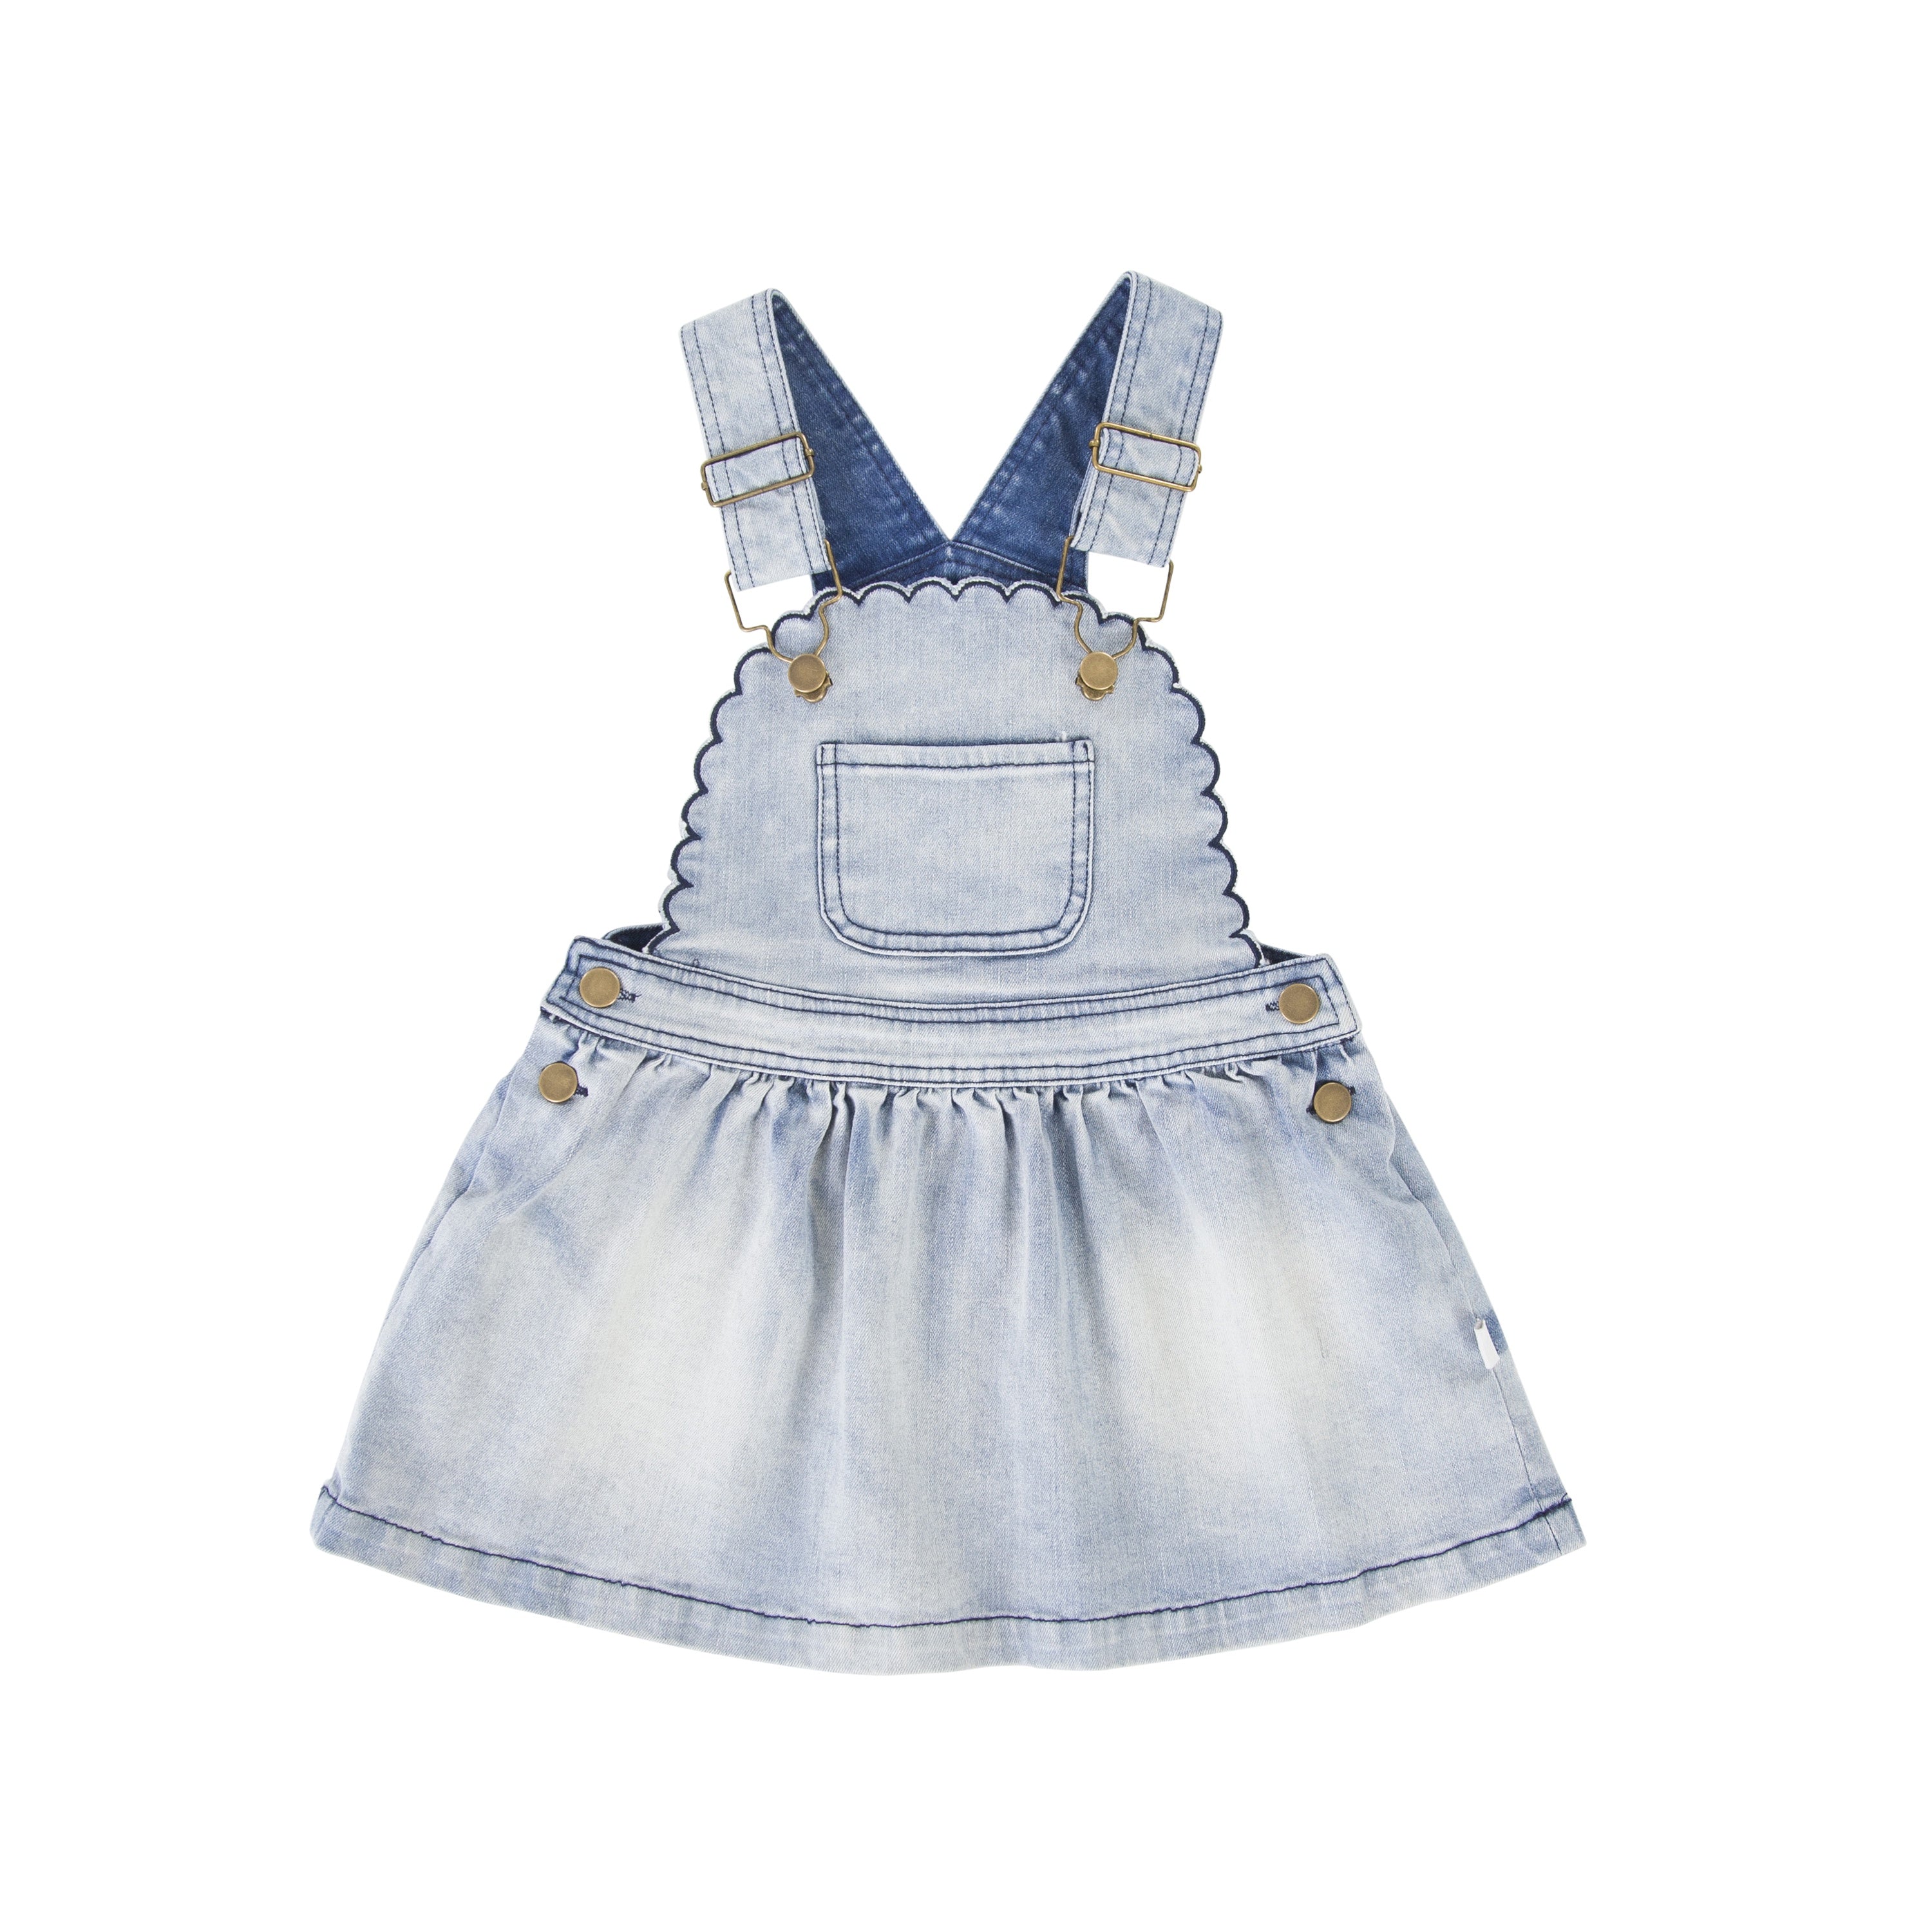 Peggy - Cleo Pinafore - Washed Denim